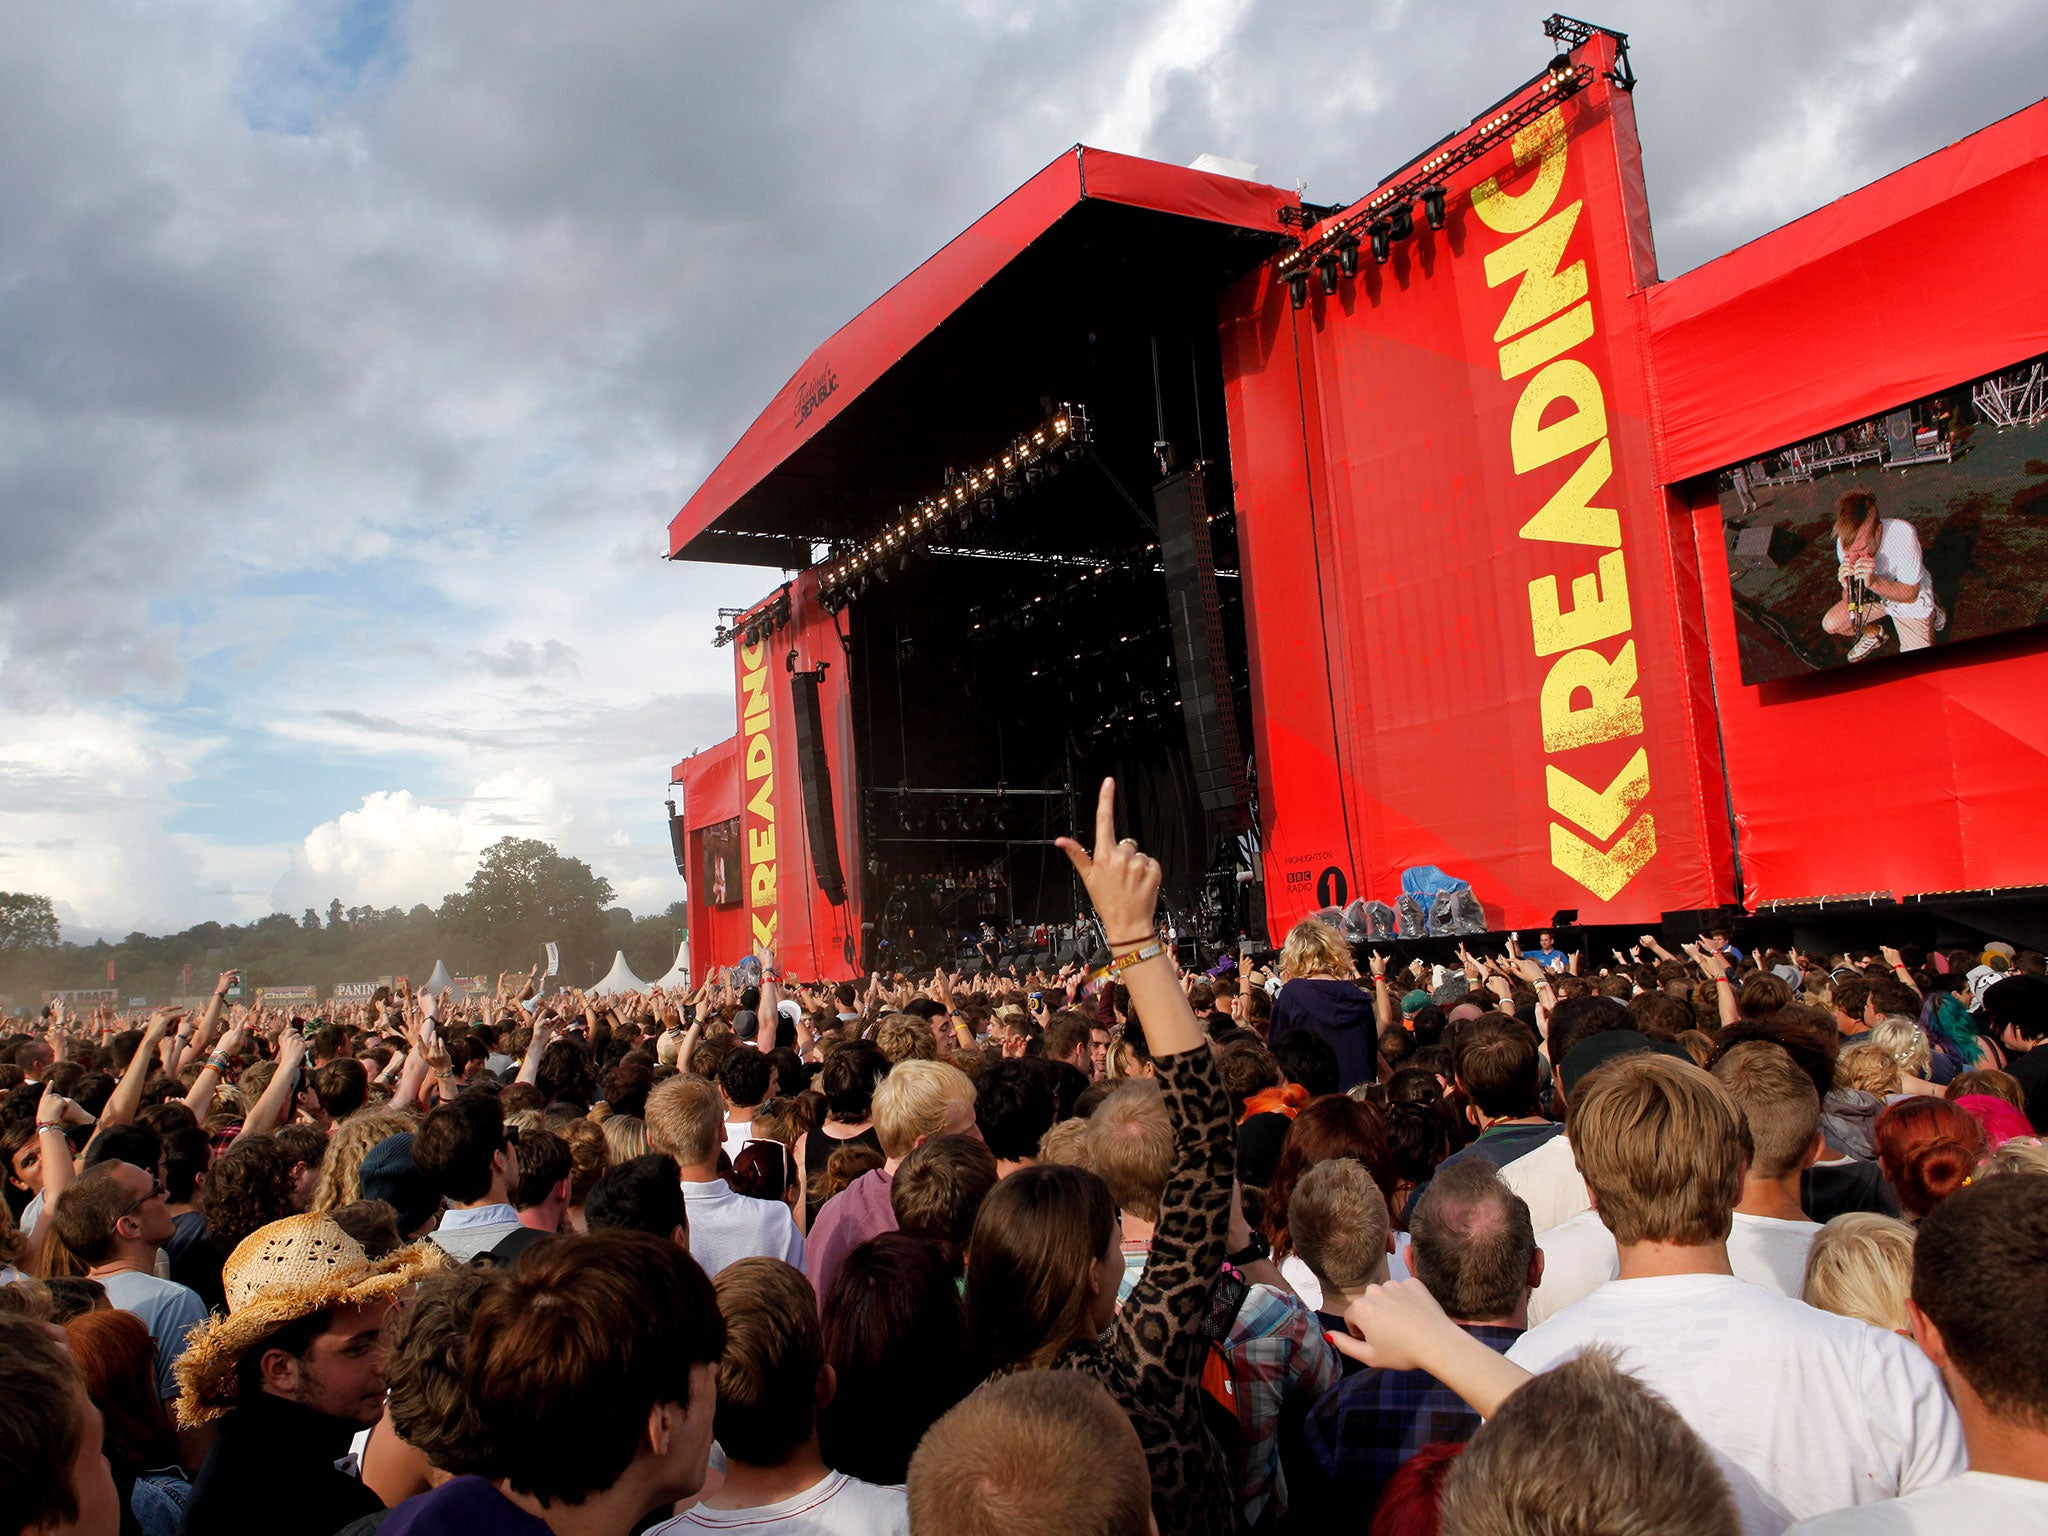 A view of the main stage at Reading Festival.